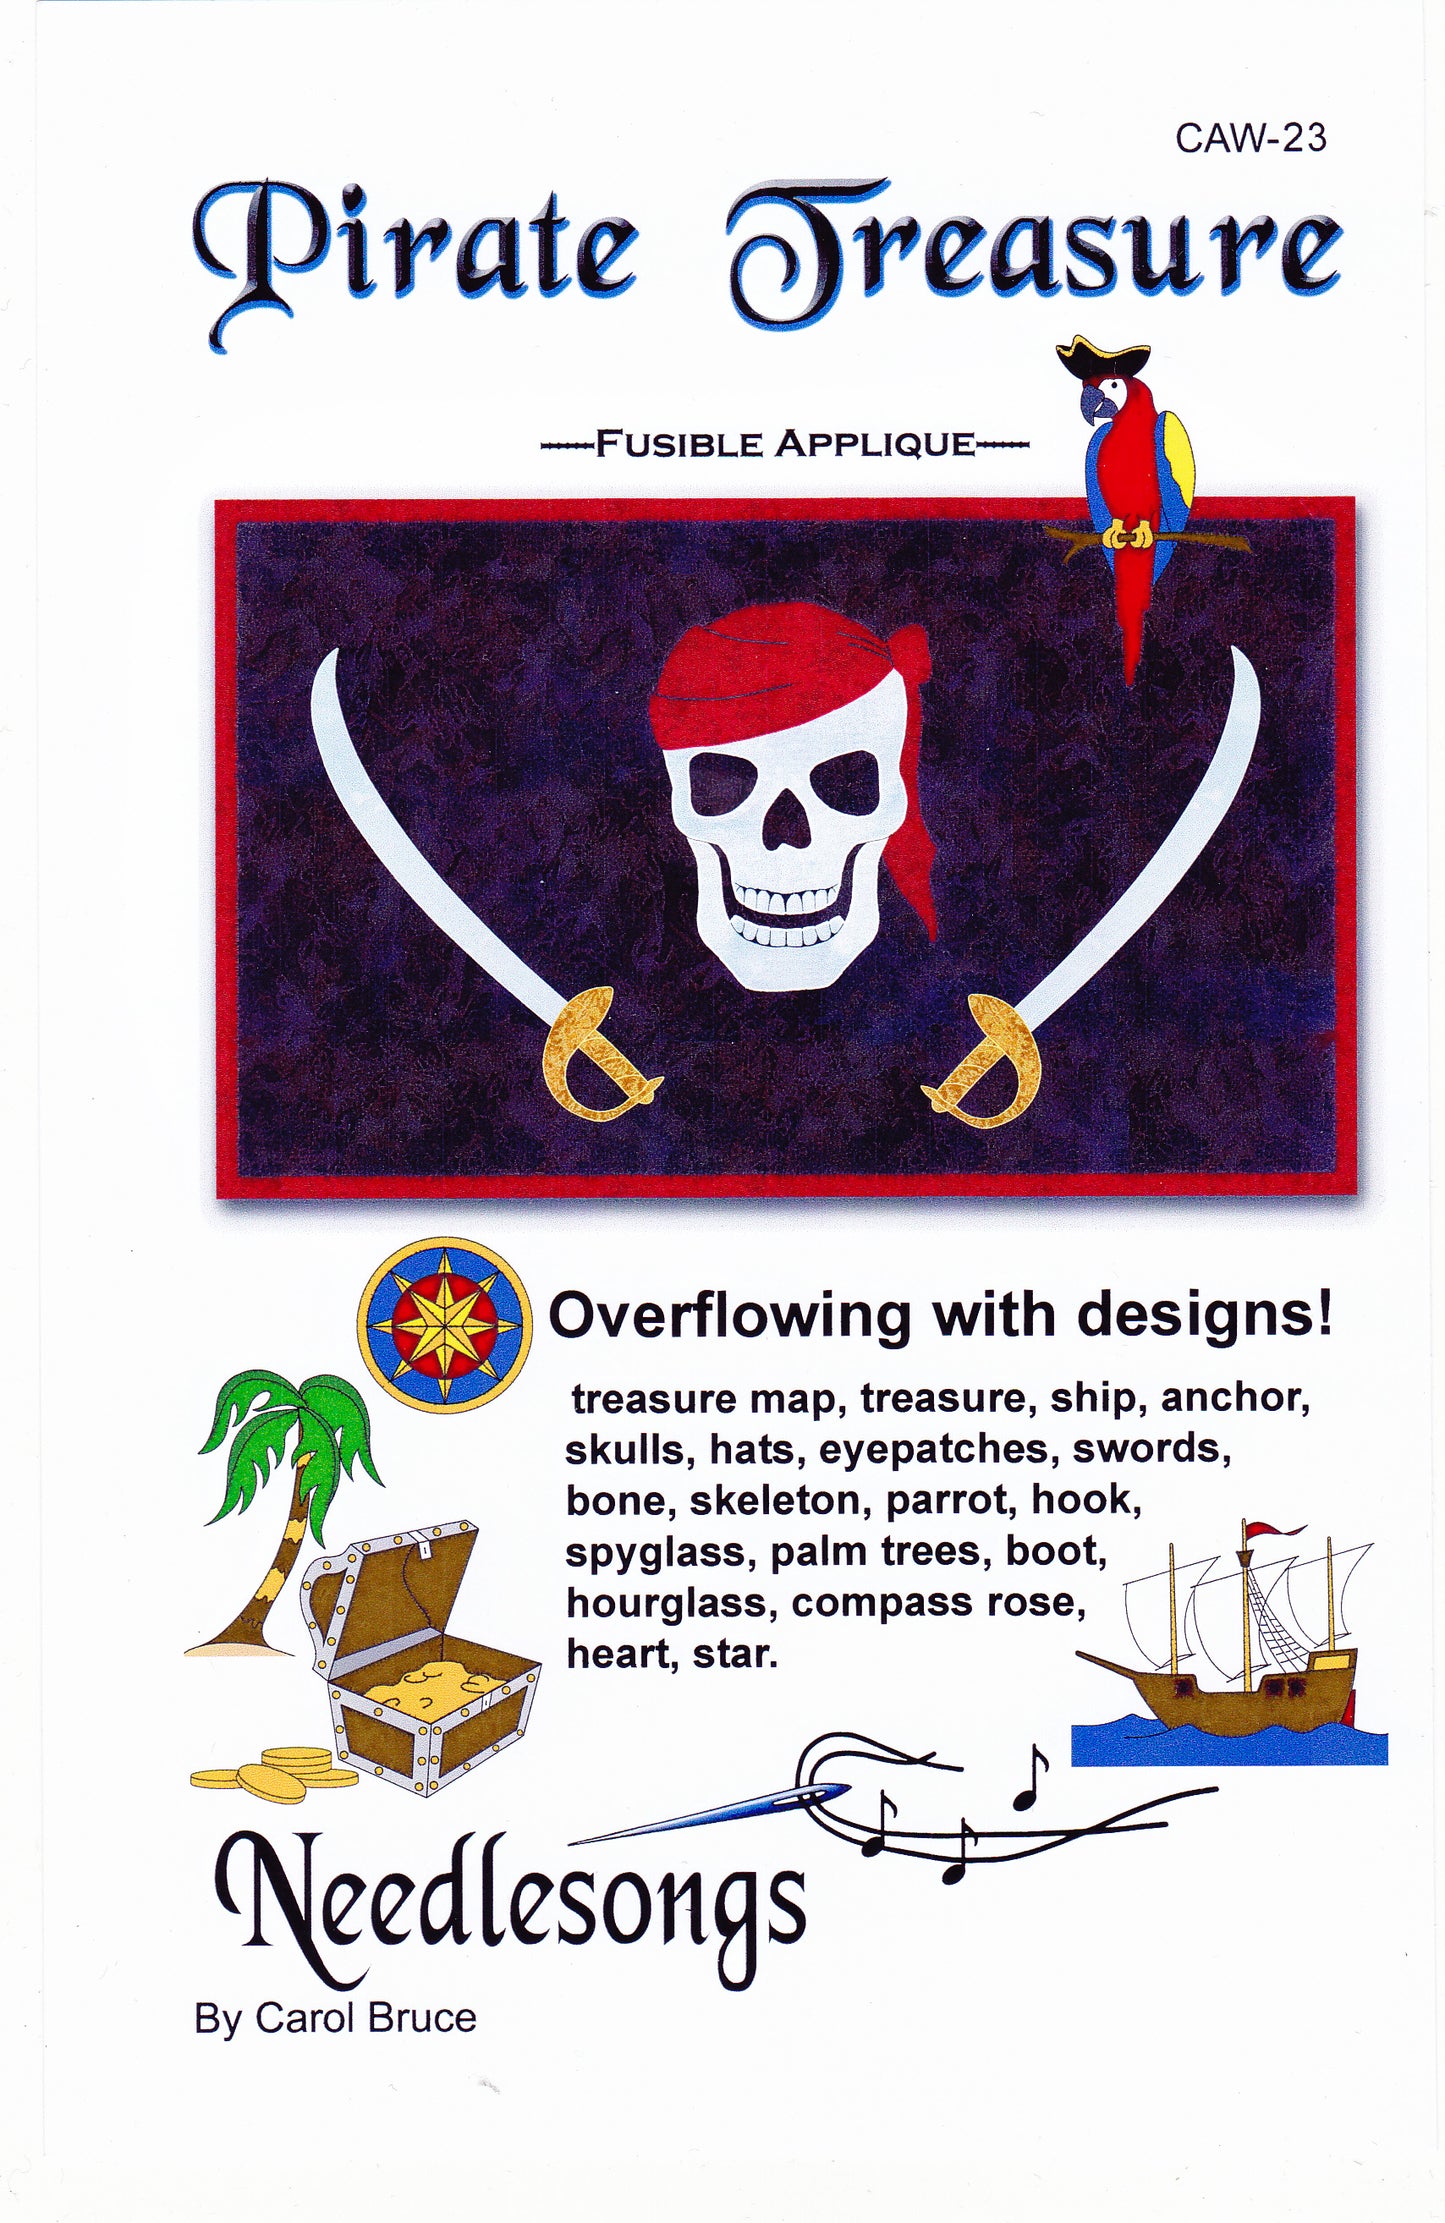 Pirate Treasure Applique' Sewing Pattern - Nonna's Notions N' Sew On